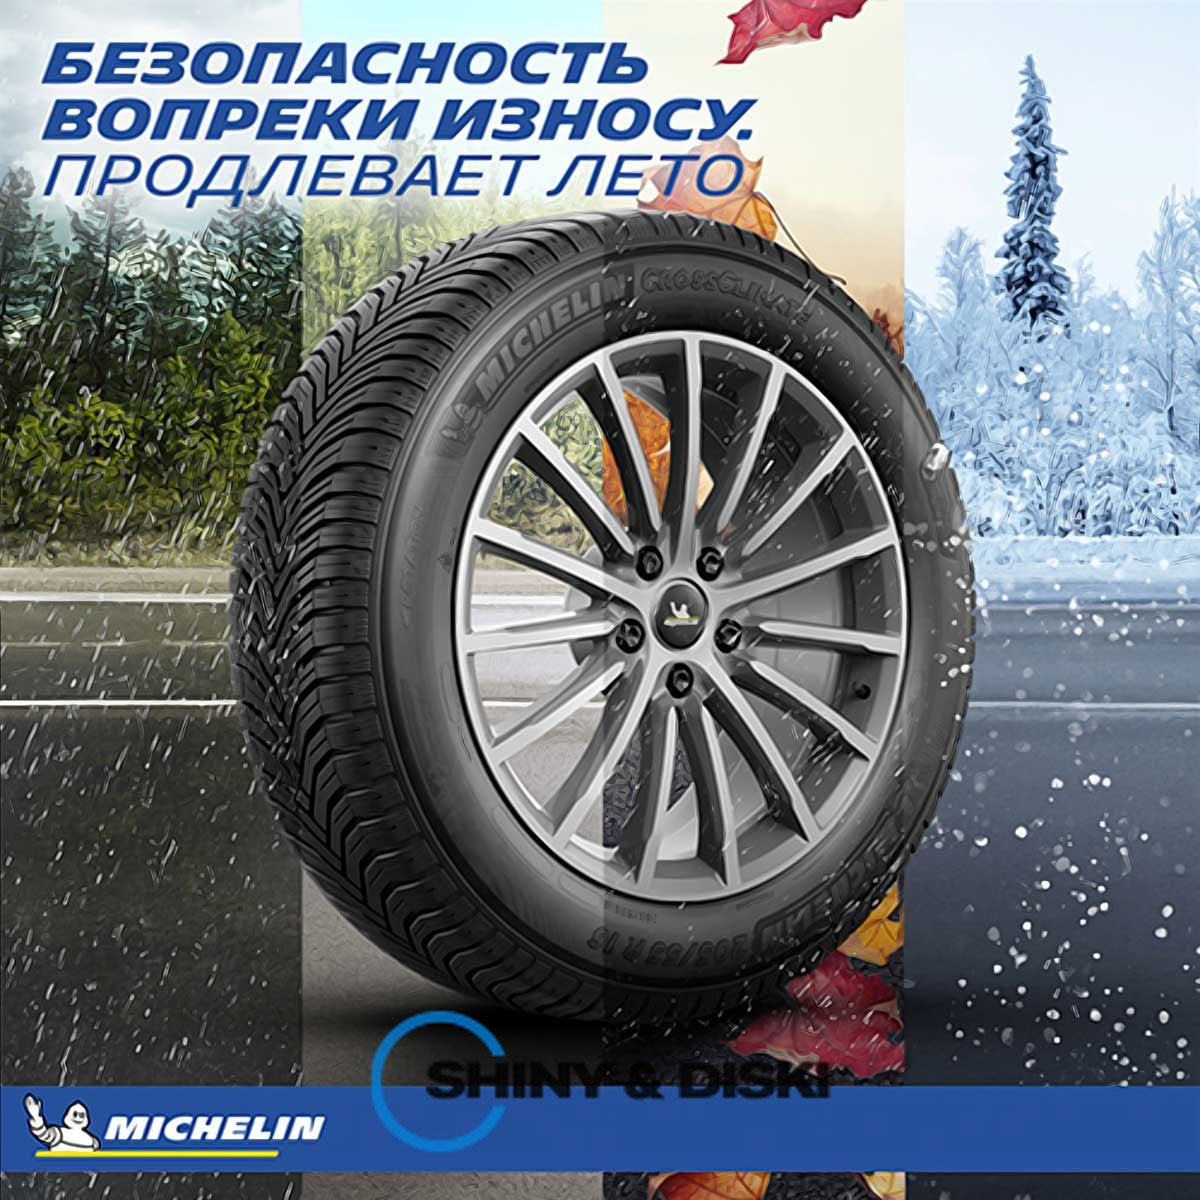 покрышки michelin cross climate+ 195/55 r15 89v